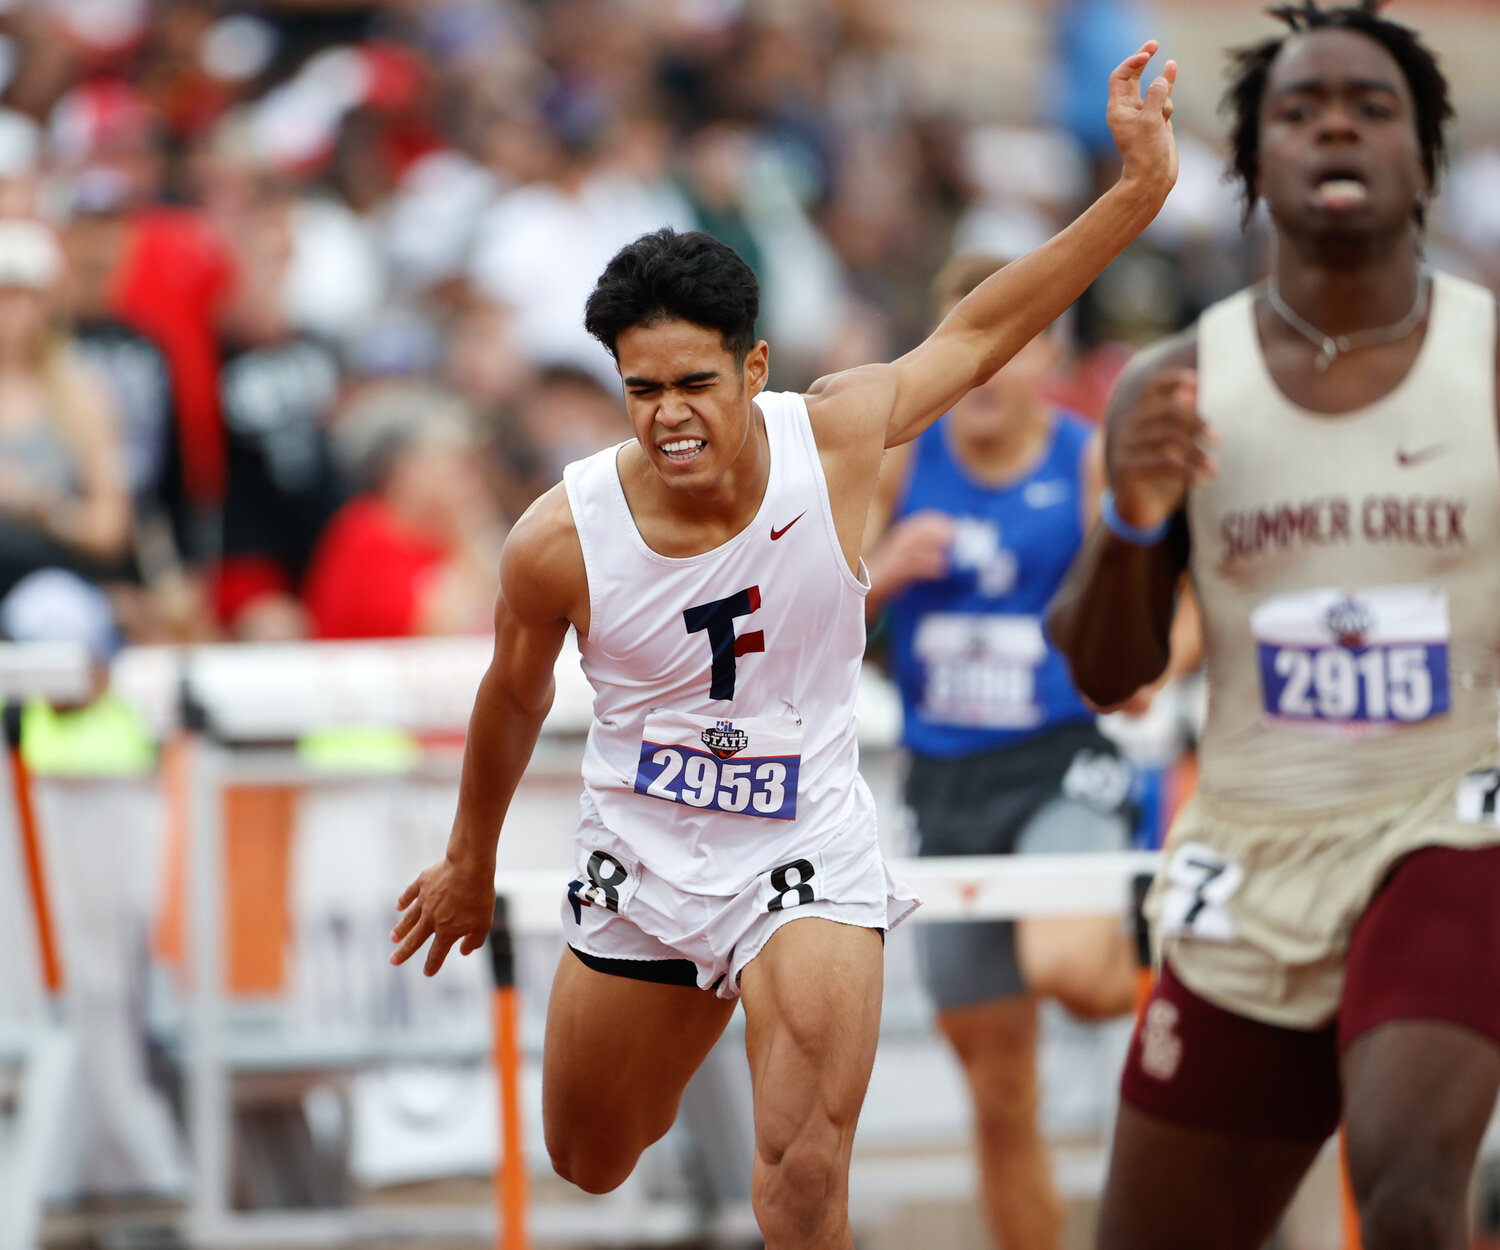 Jayden Keys of Tompkins High School (2953) crosses the finish line third, winning the bronze medal, in the Class 6A boys 300-meter hurdles during the UIL State Track and Field Meet on Saturday, May 13, 2023 in Austin.